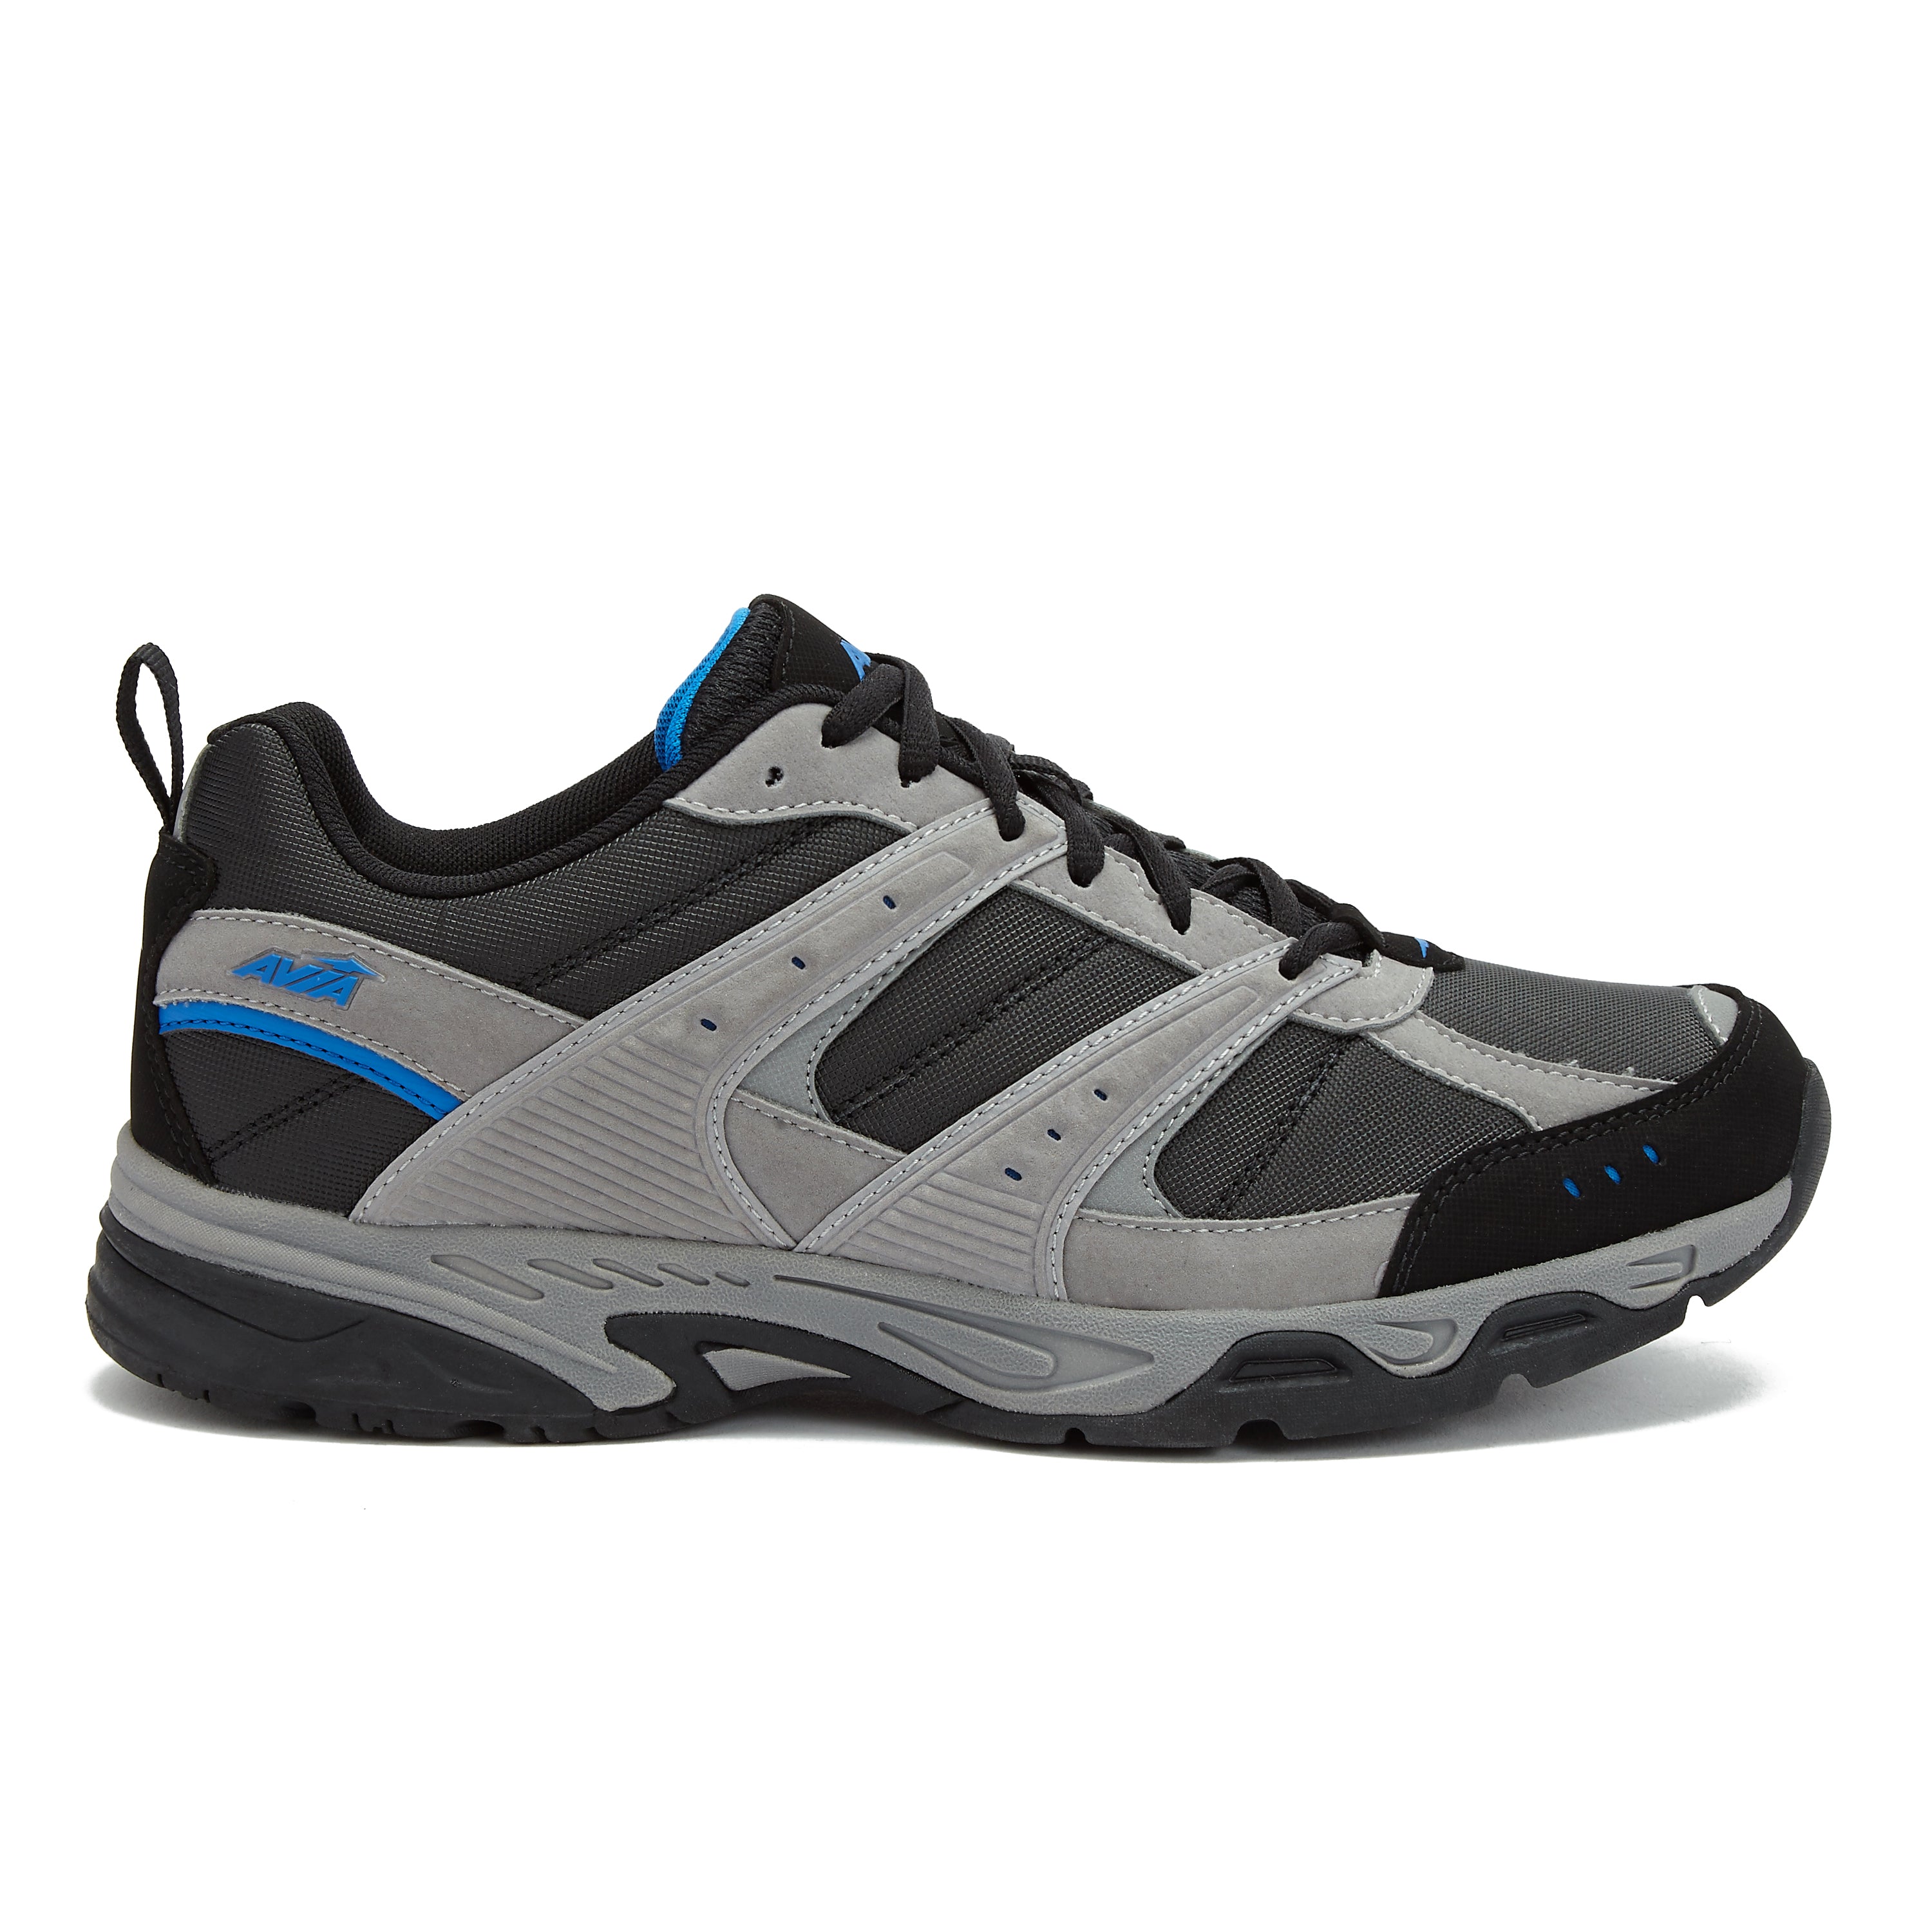 Avia Canyon Men's Trail Shoes and Walking Sneakers